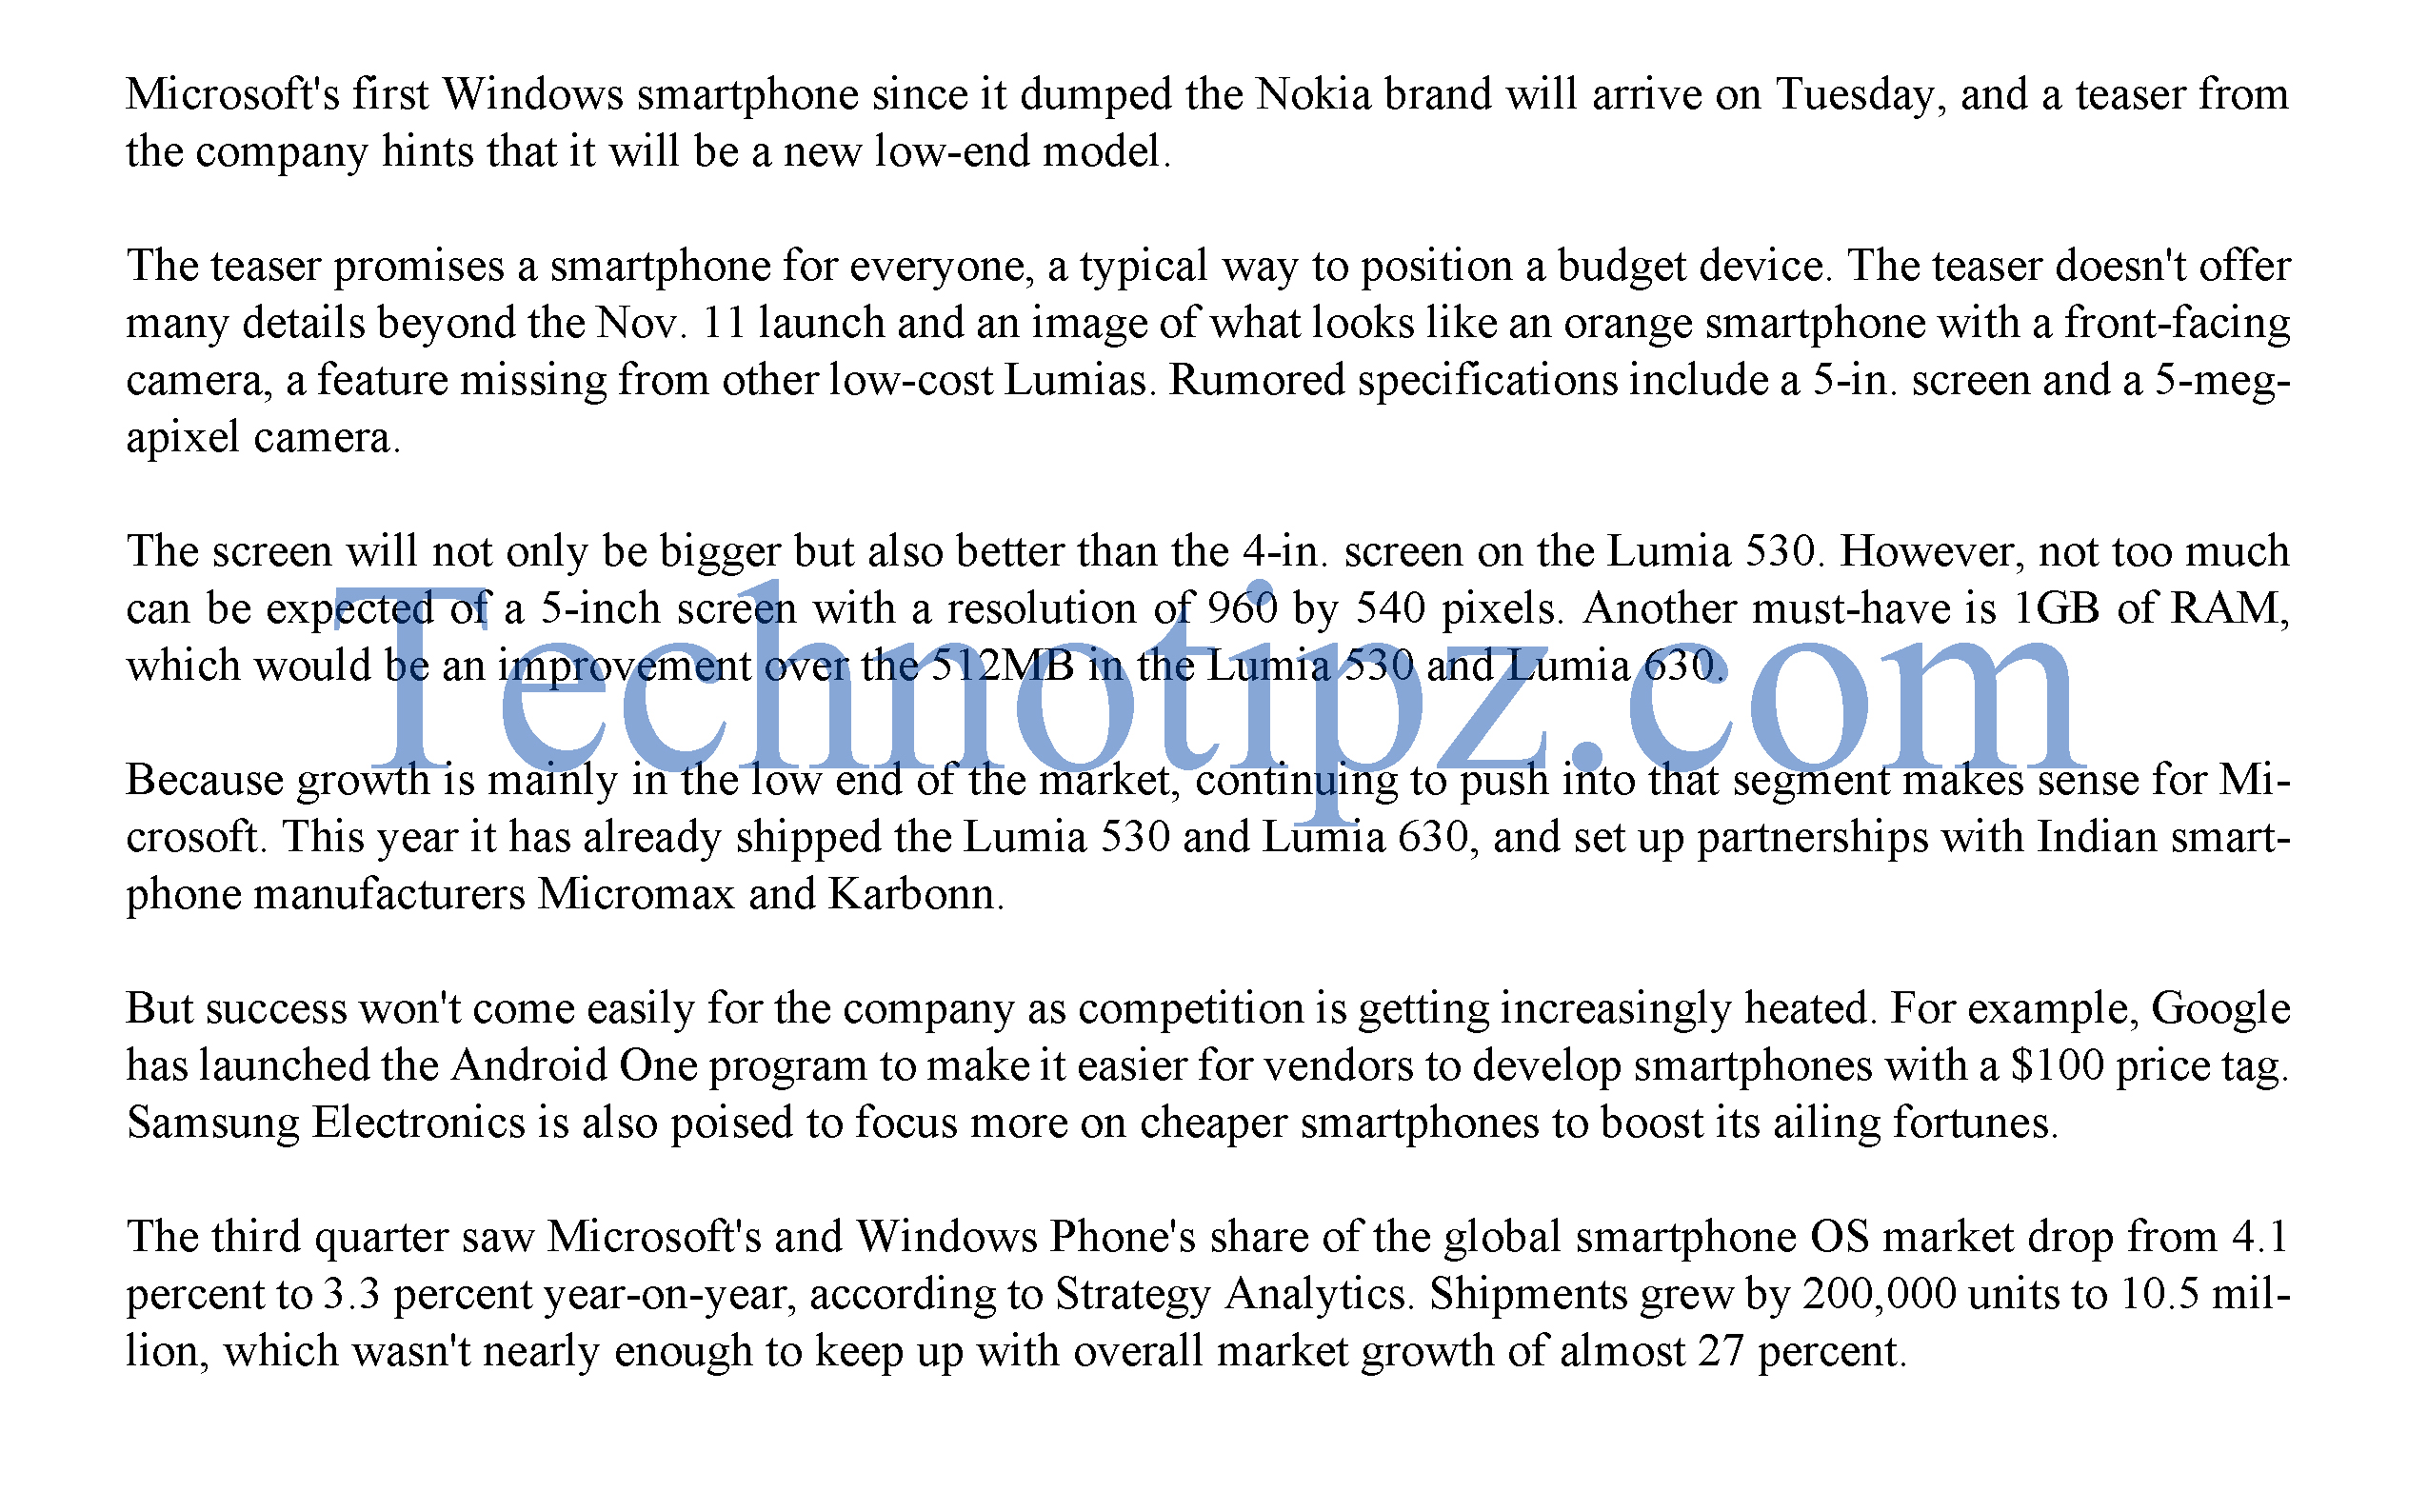 Microsoft's First Lumia Mobile coming on this Tuesday.